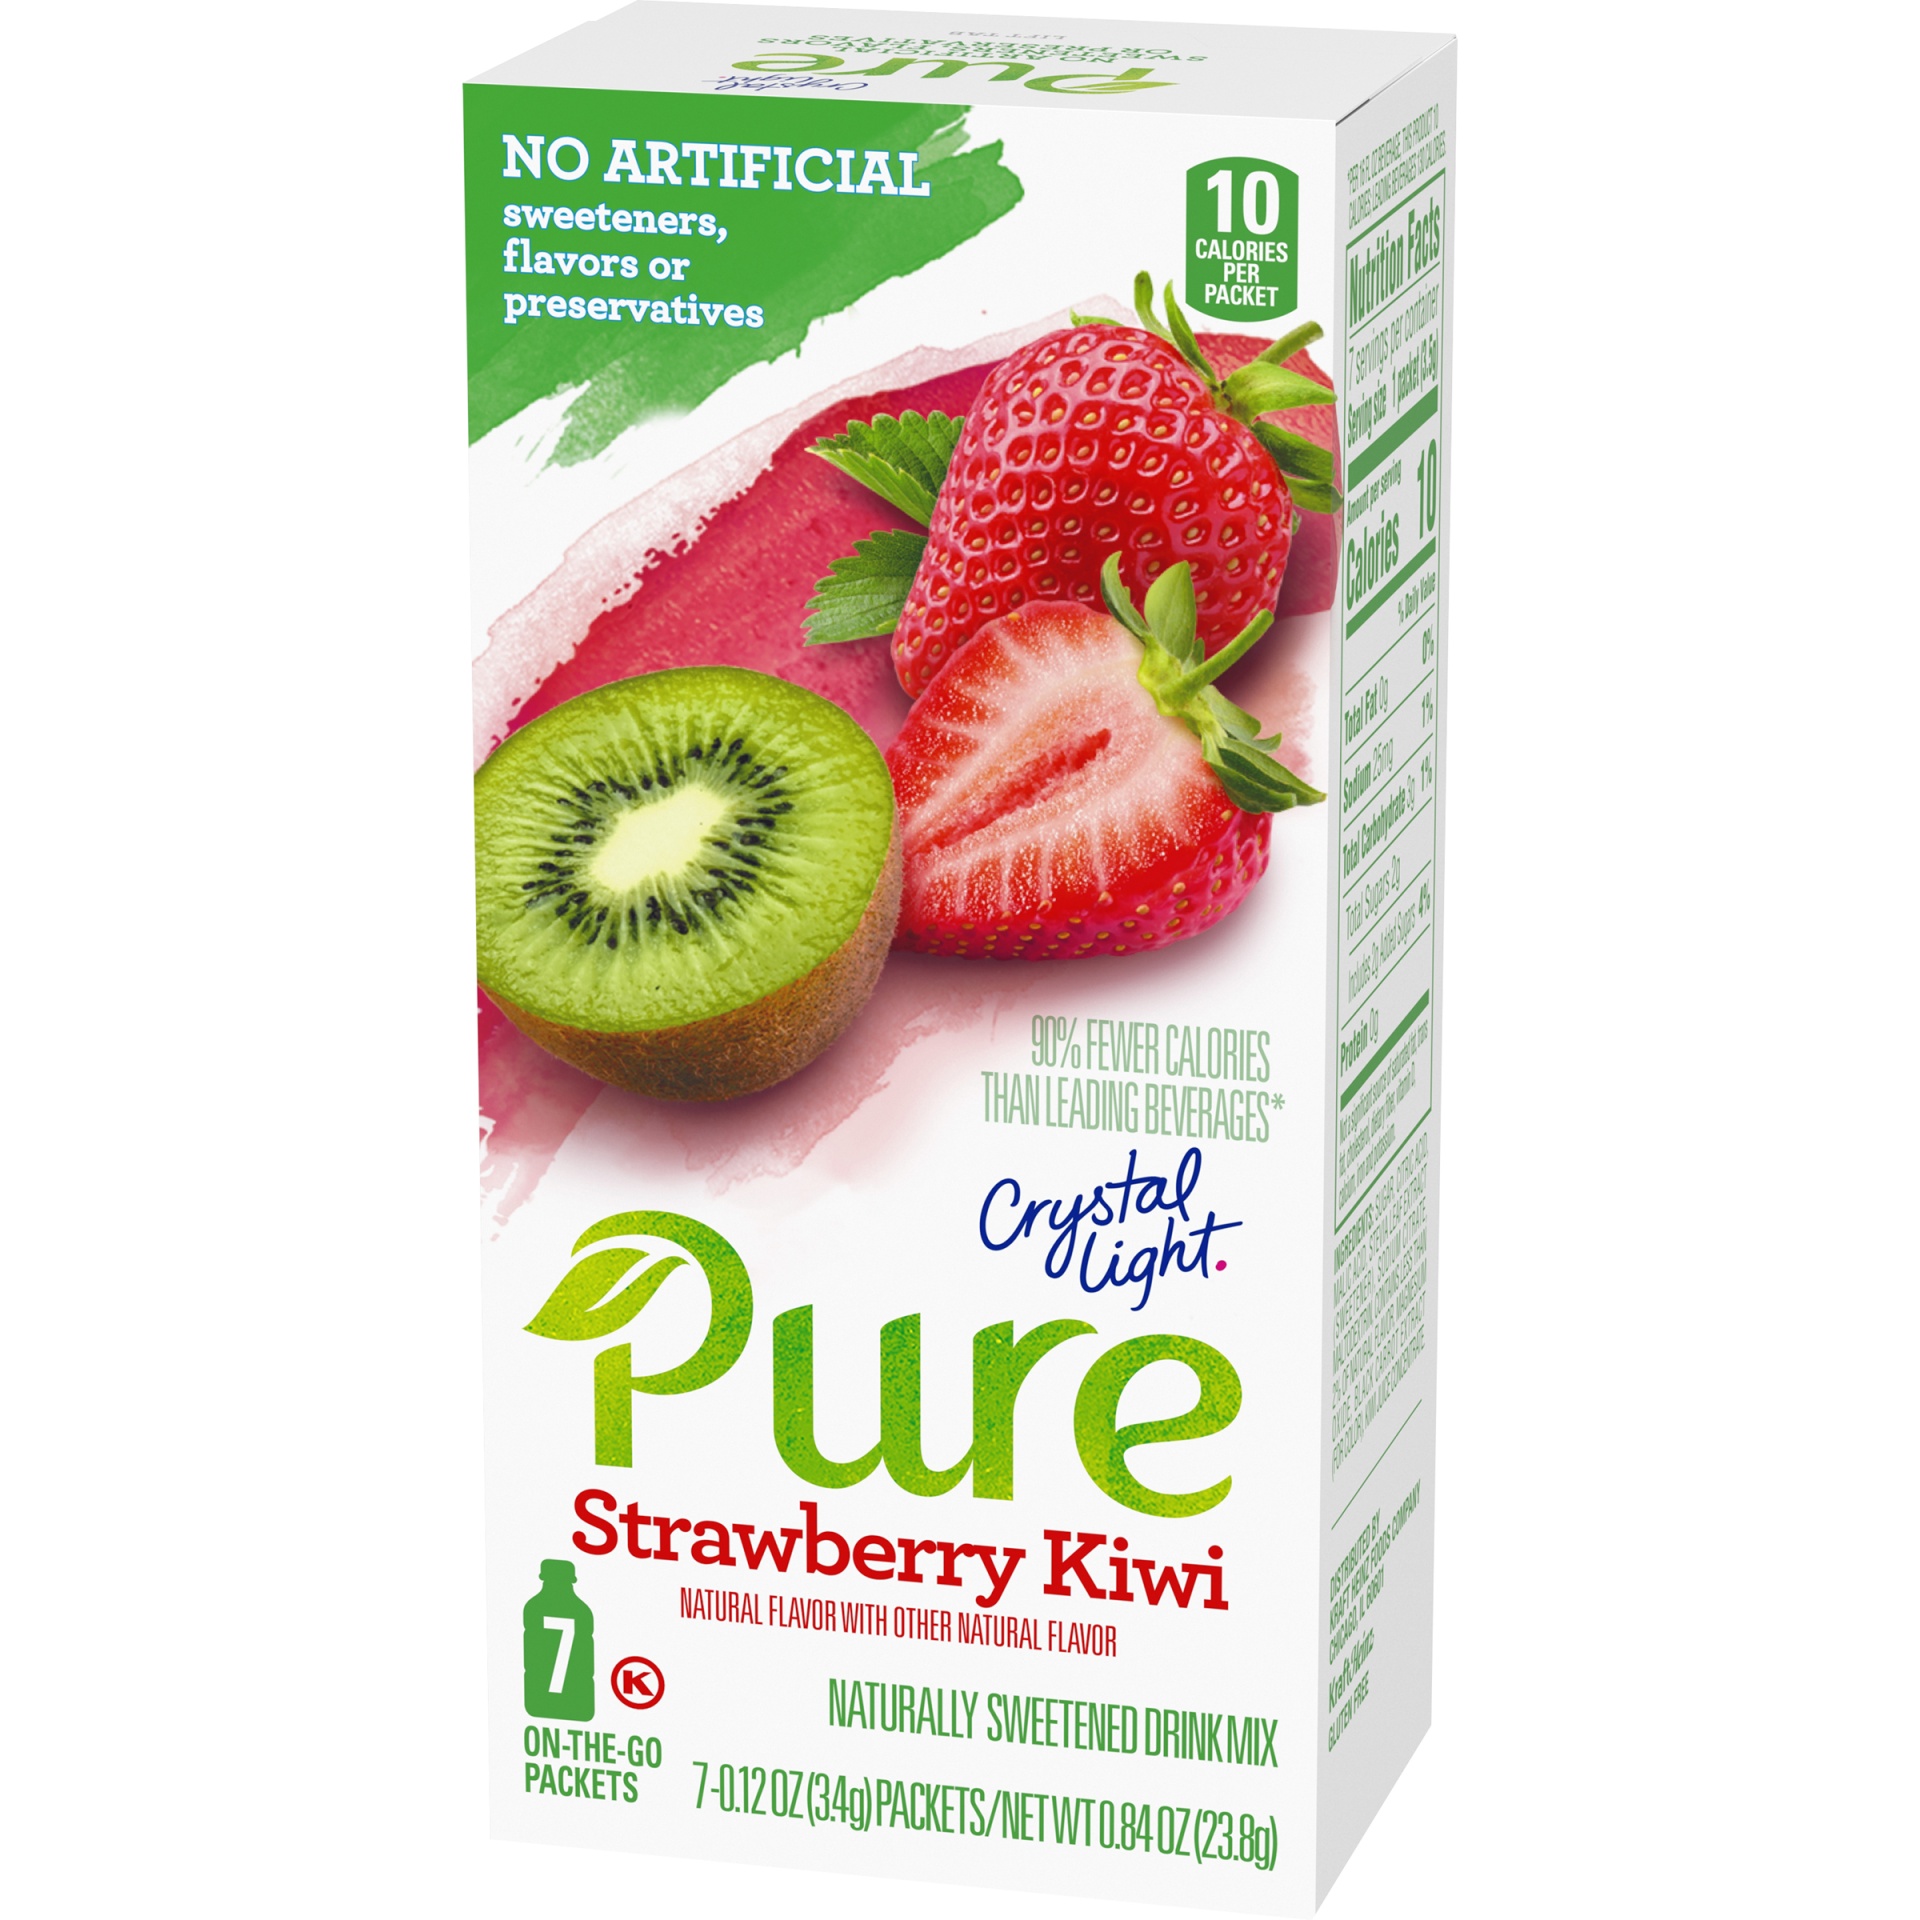 slide 3 of 6, Crystal Light Pure Strawberry Kiwi Naturally Flavored Powdered Drink Mix with No Artificial Sweeteners On-the-Go, 7 ct; 0.12 oz